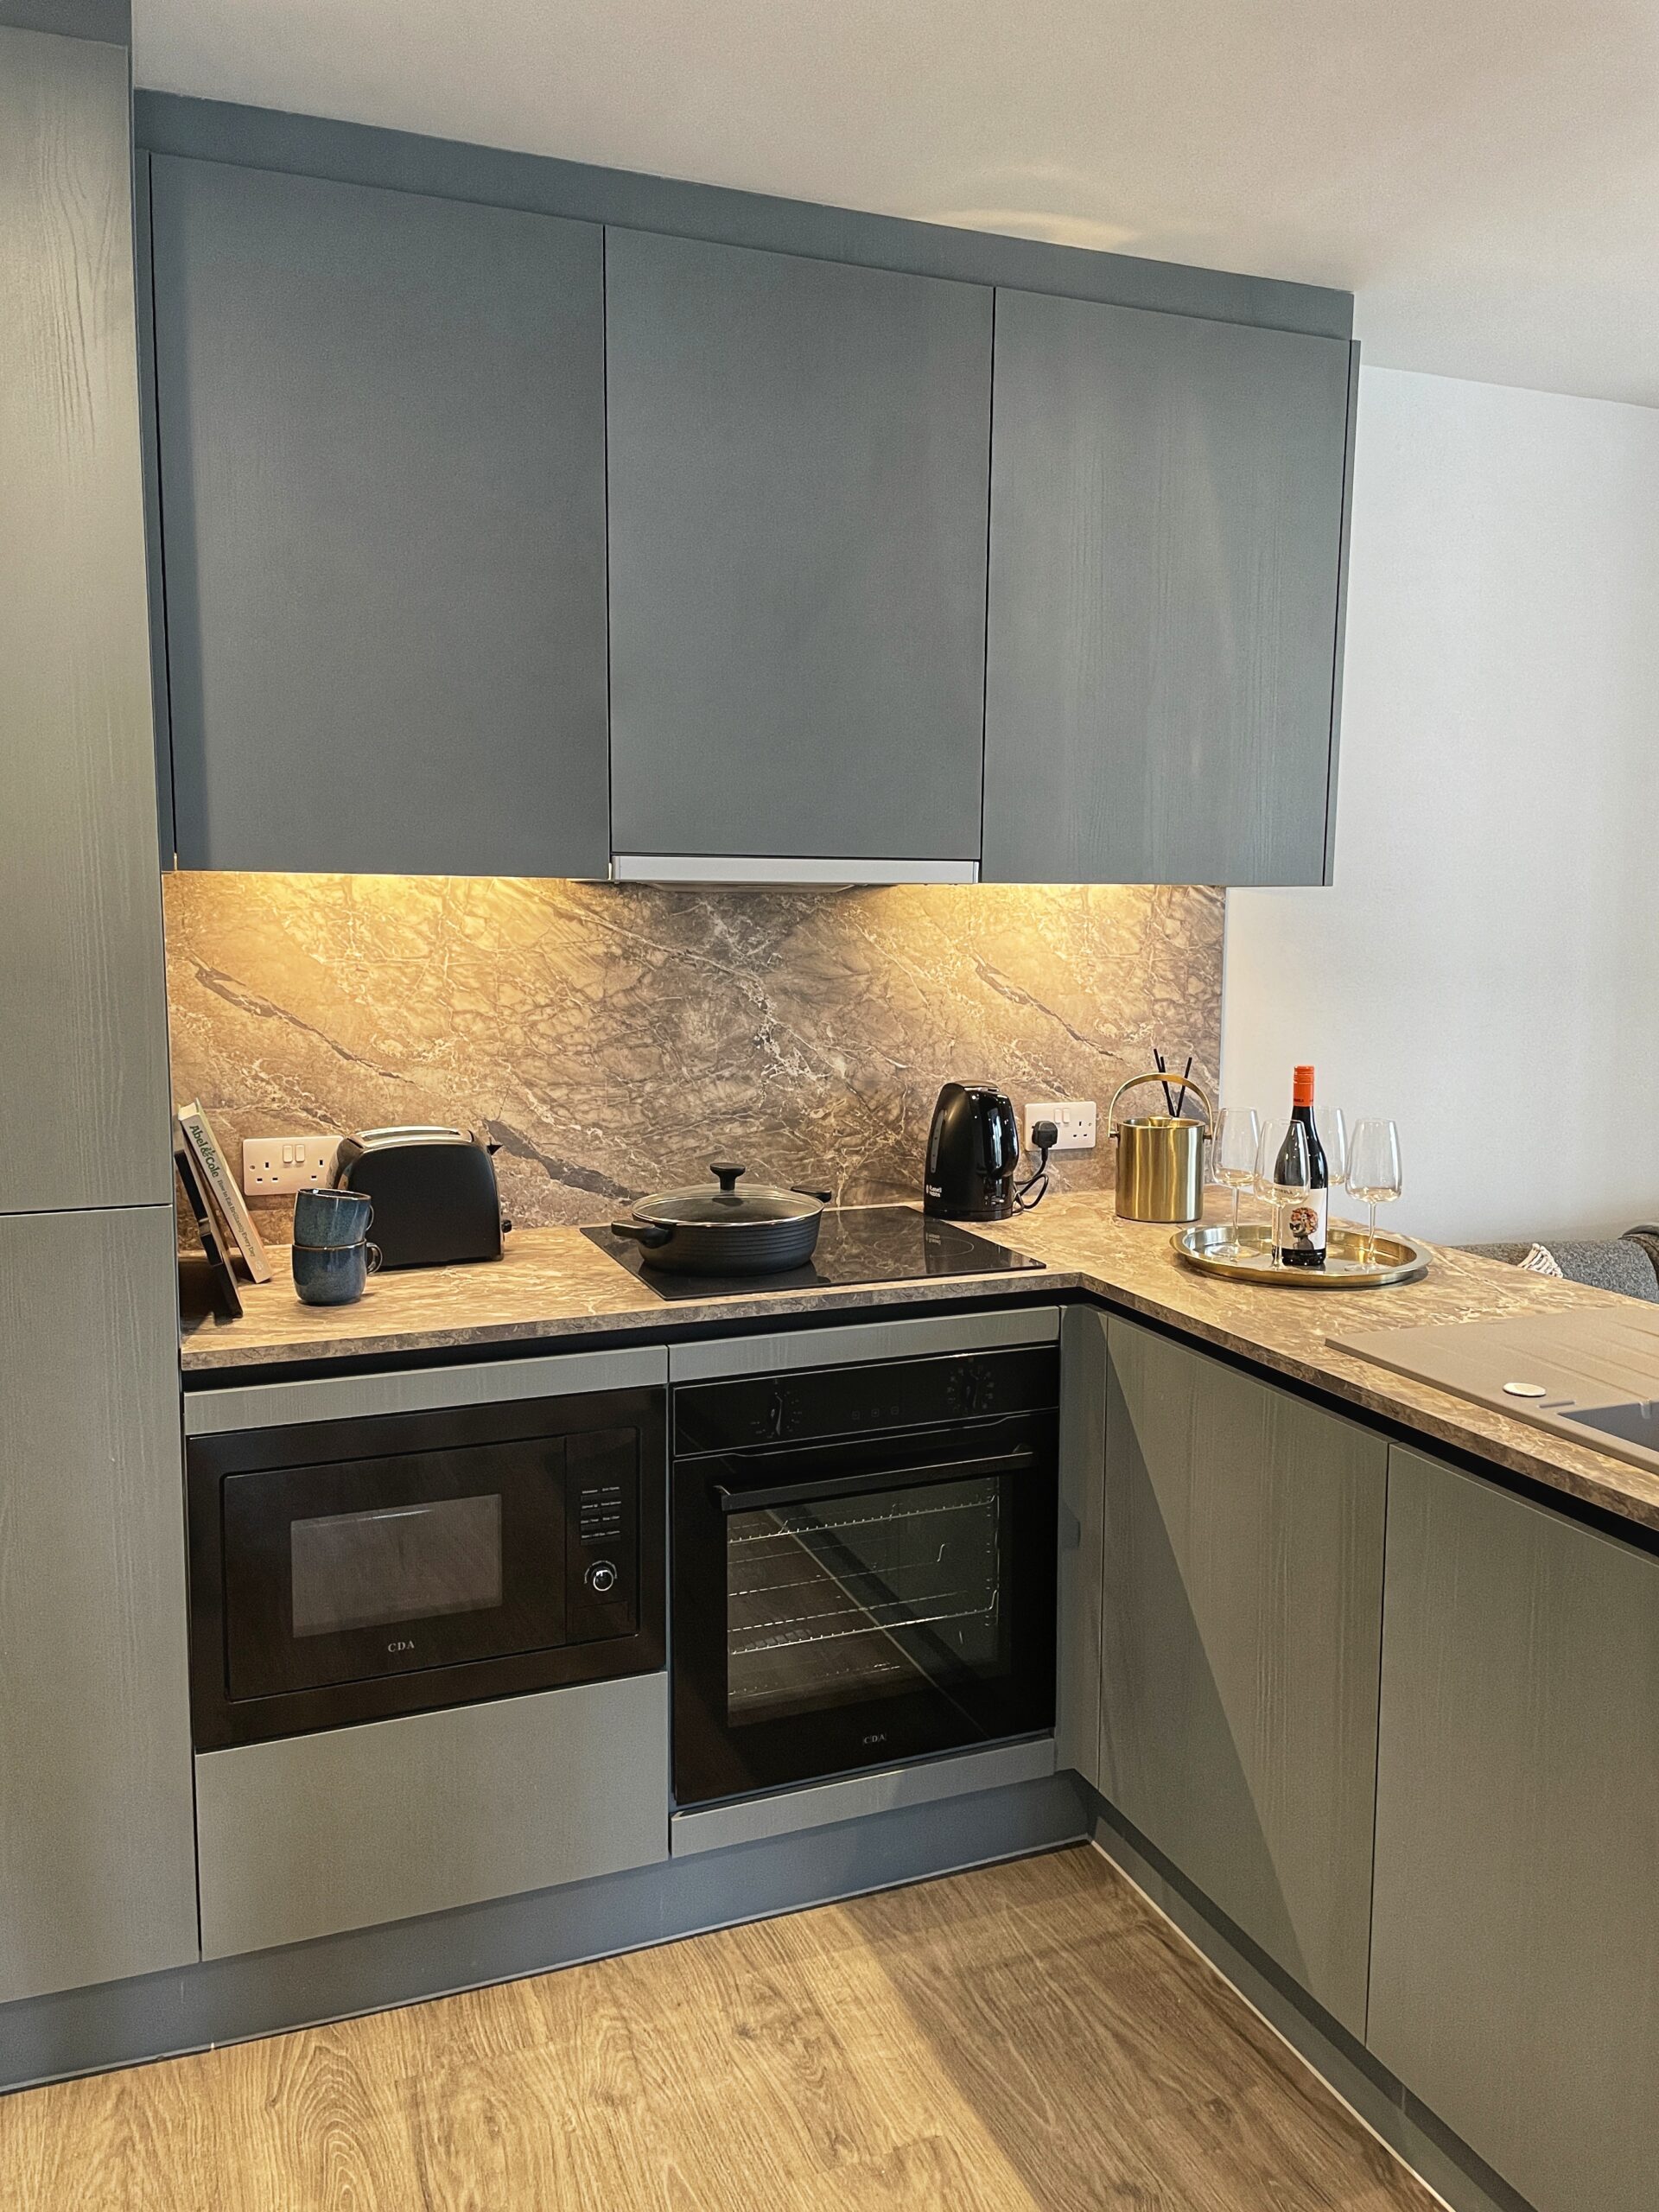 The co-living kitchen inside the apartments